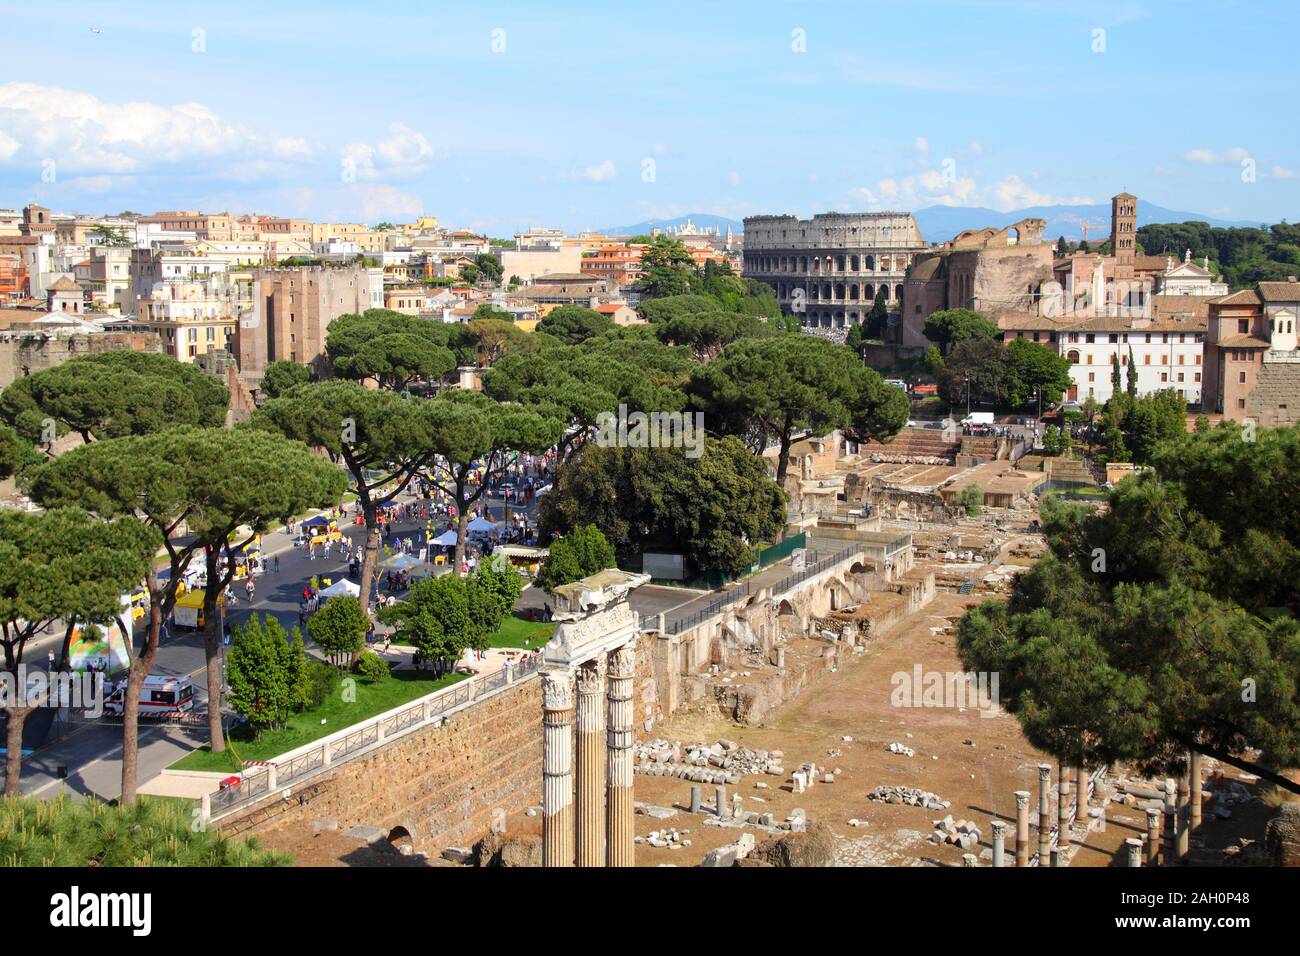 Rome, Italy - skyline with Colosseum and Roman Forum Stock Photo